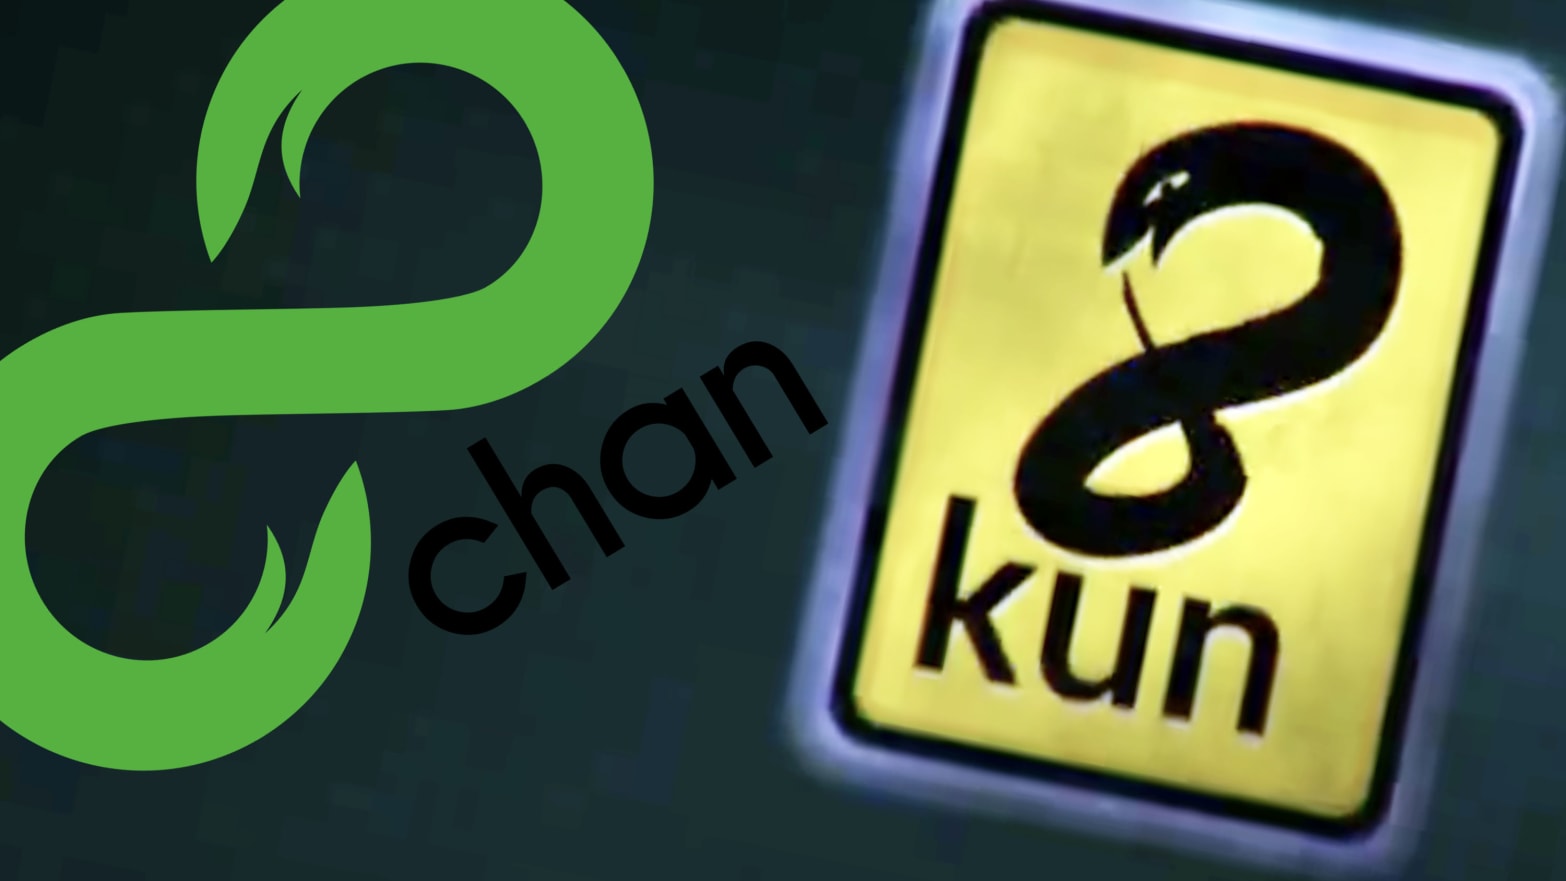 8chan is back online, this time as 8kun - The Washington Post